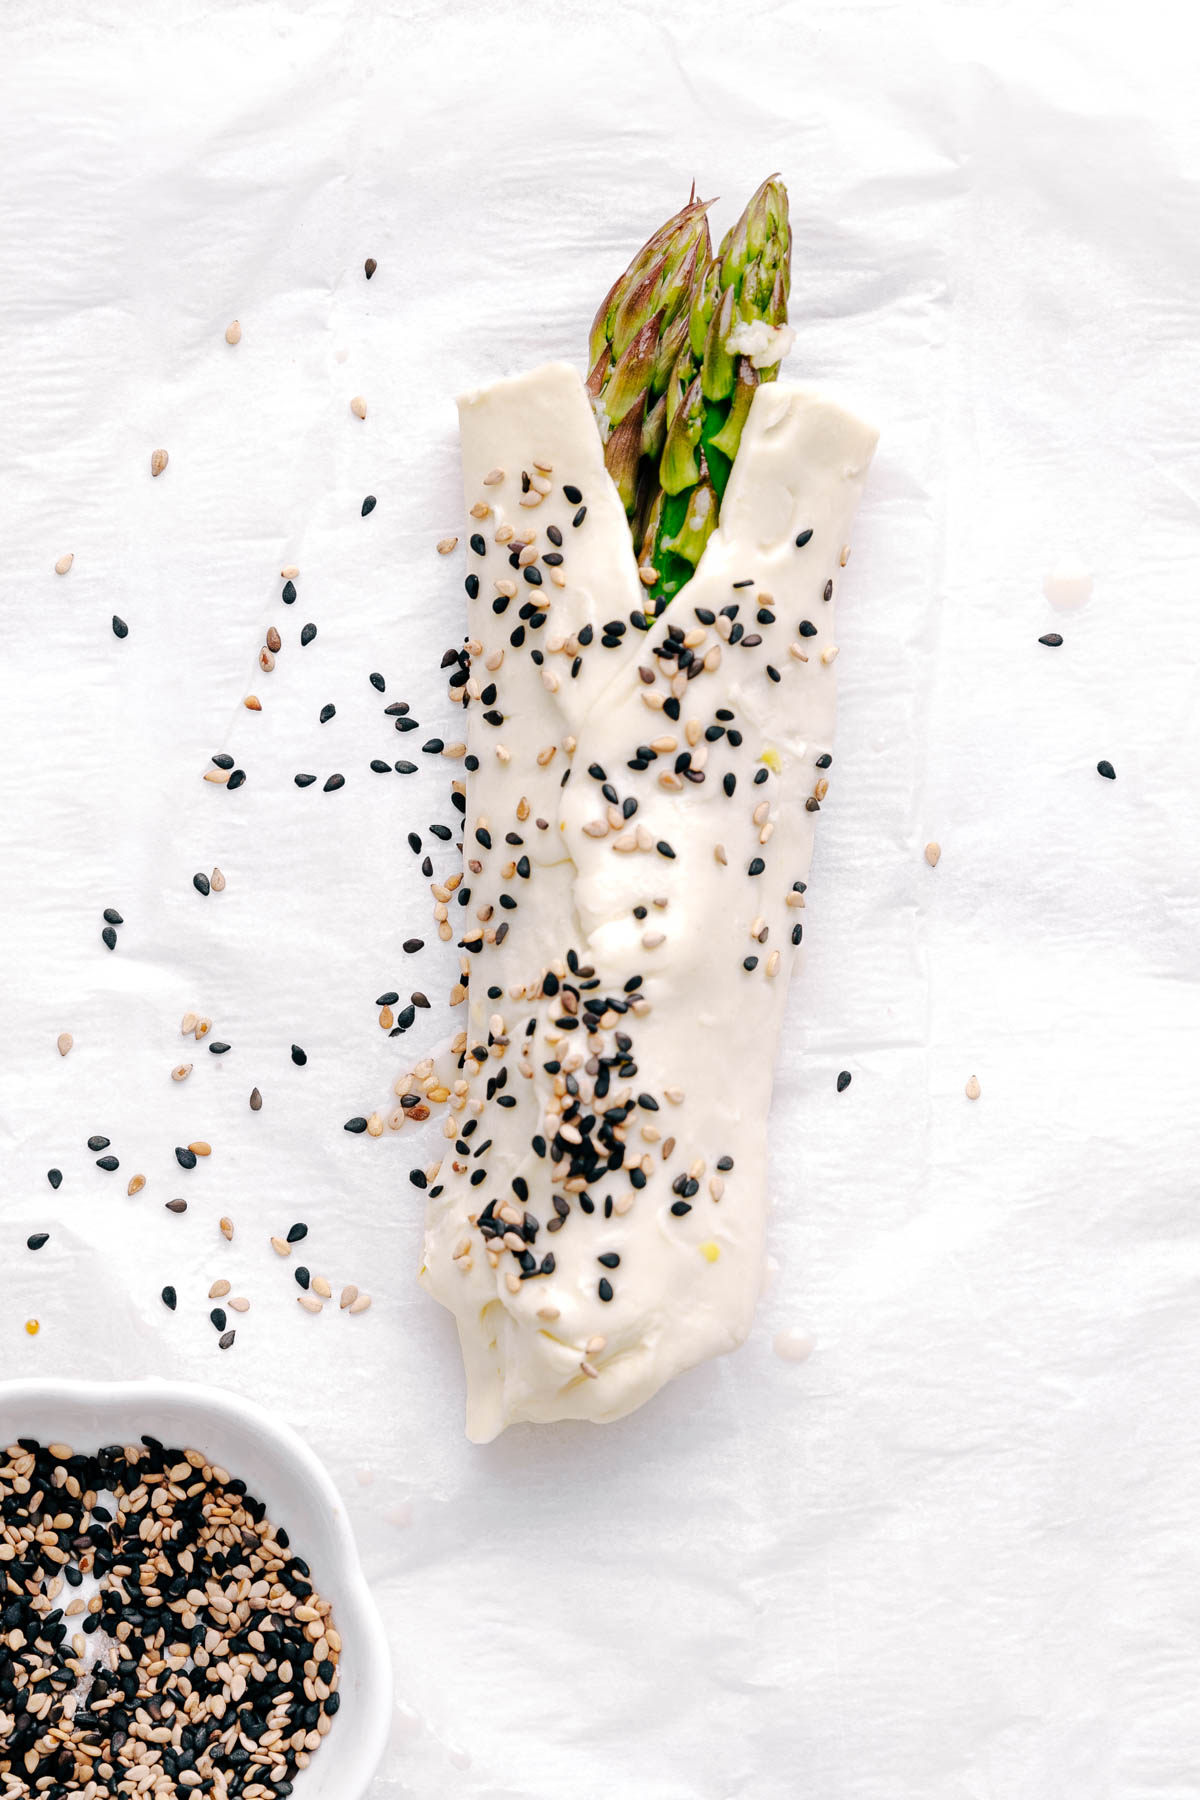 A bundle of Asparagus with Puff Pastry on white parchment paper sprinkled with white and black sesame seeds next to a small bowl with sesame seeds